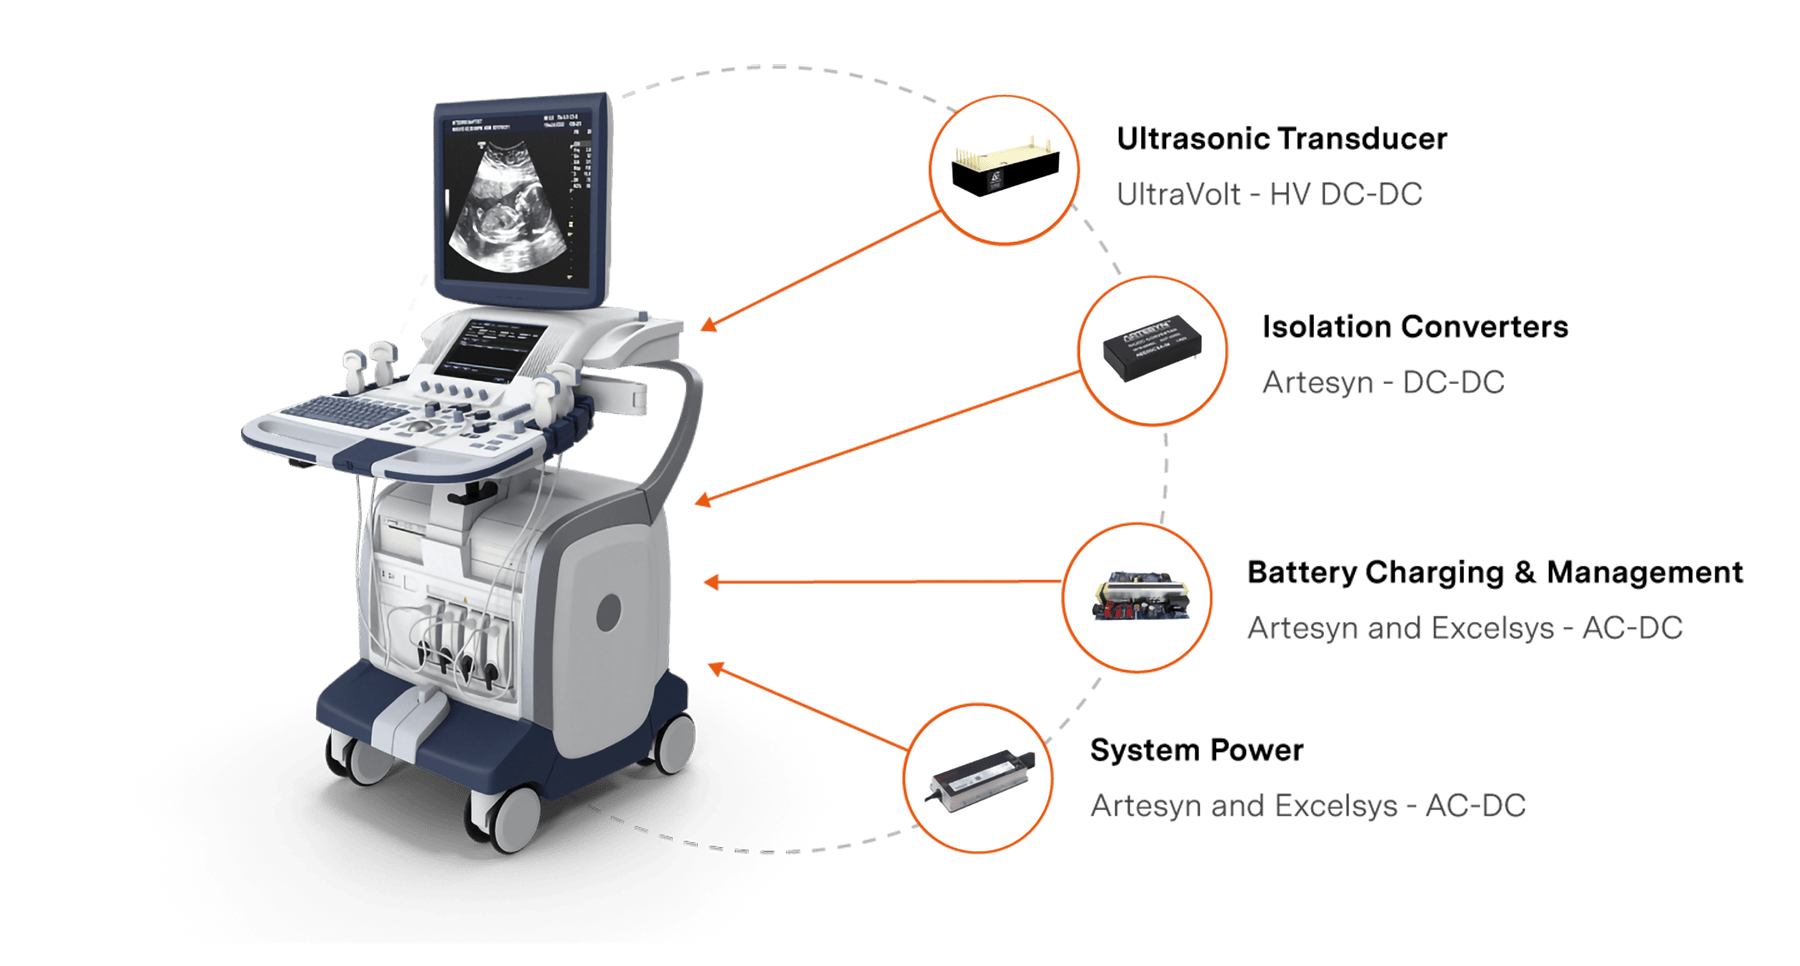 Power requirements for High-Intensity Focused Ultrasound machine